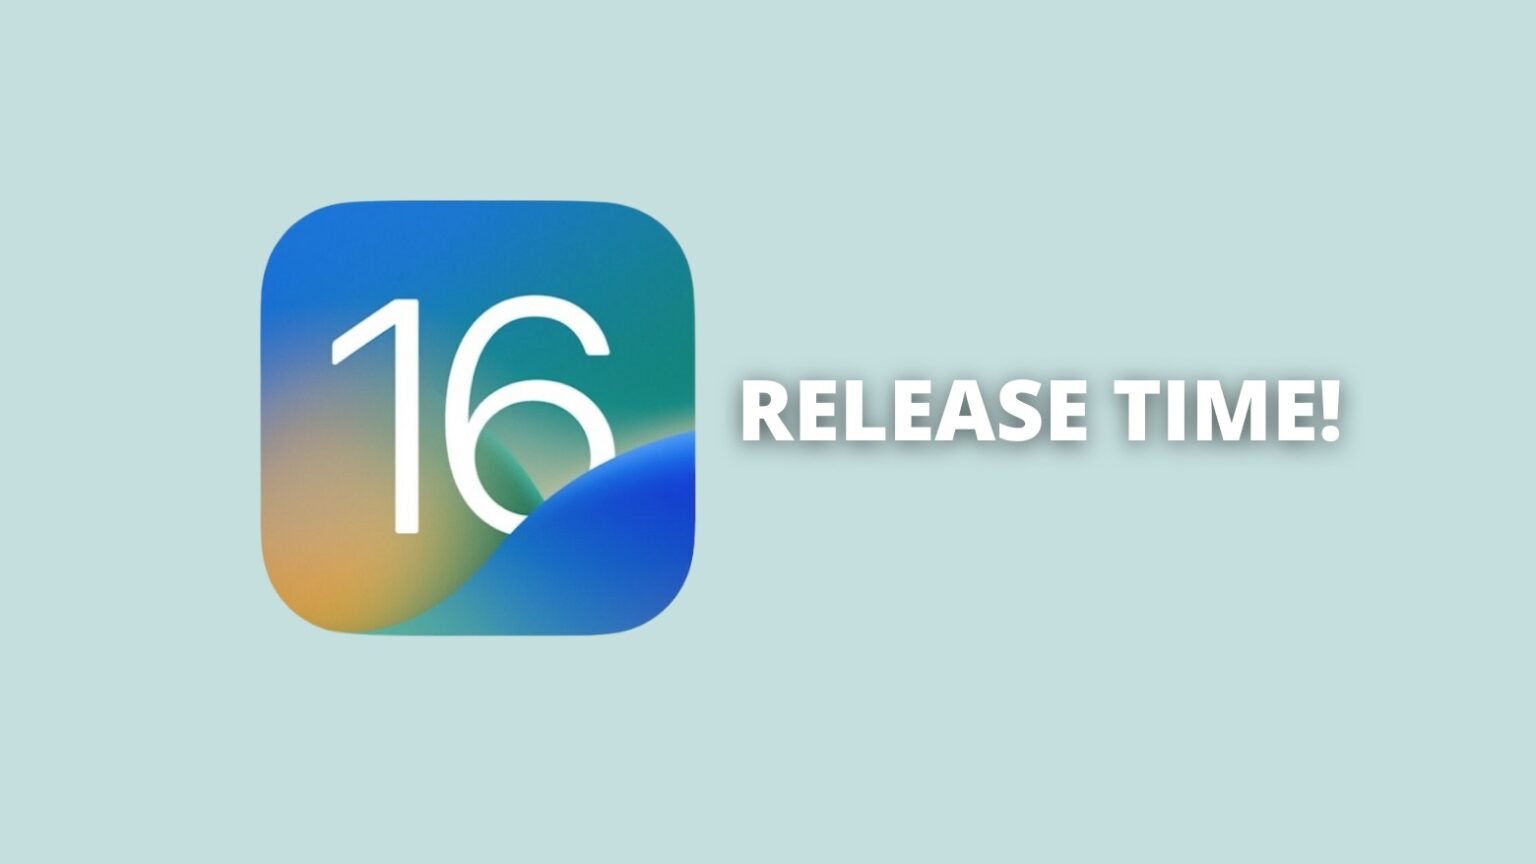 iOS 16 Release time on September 12